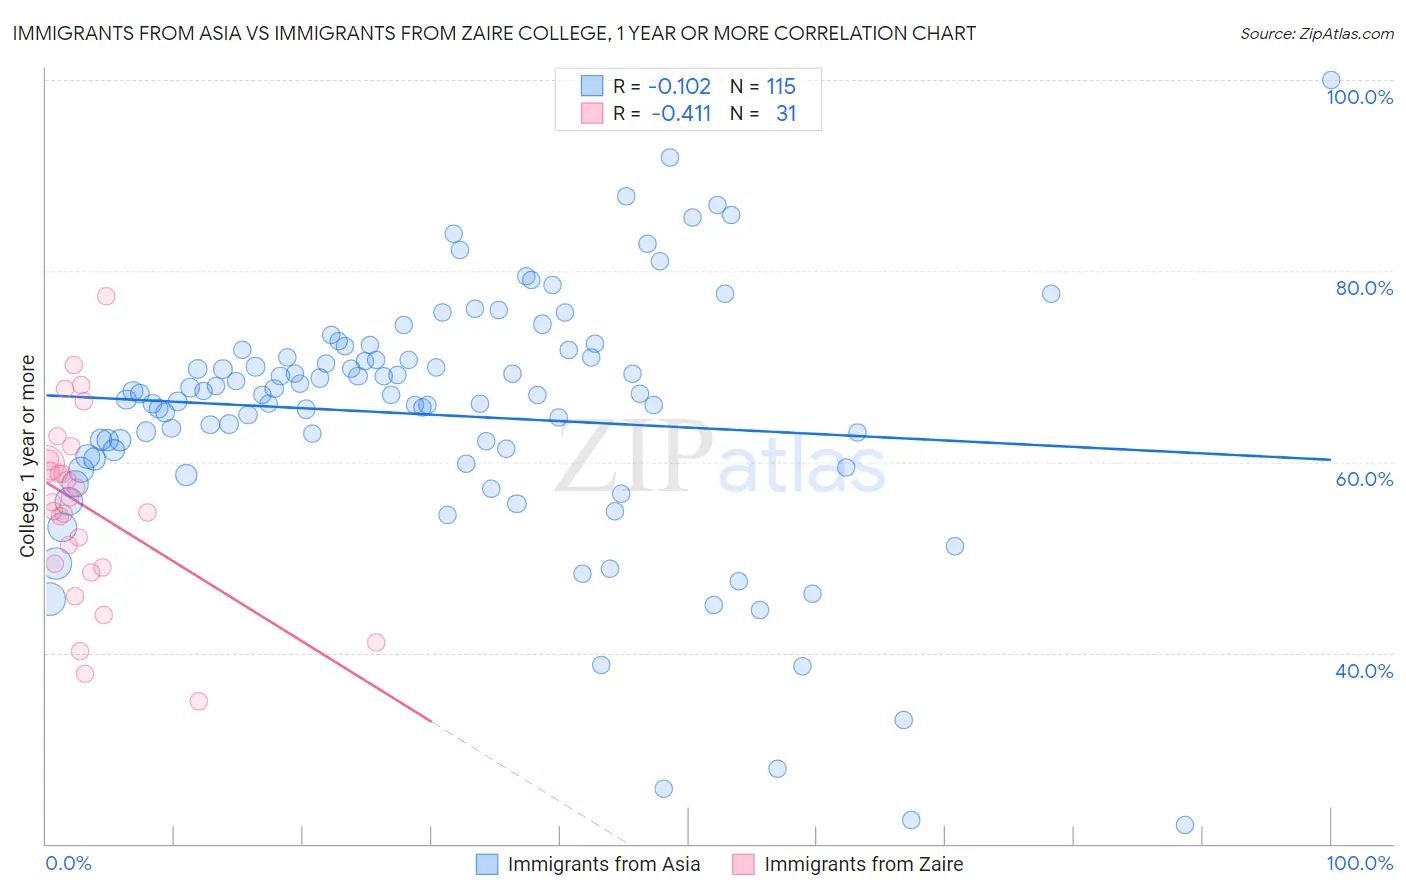 Immigrants from Asia vs Immigrants from Zaire College, 1 year or more